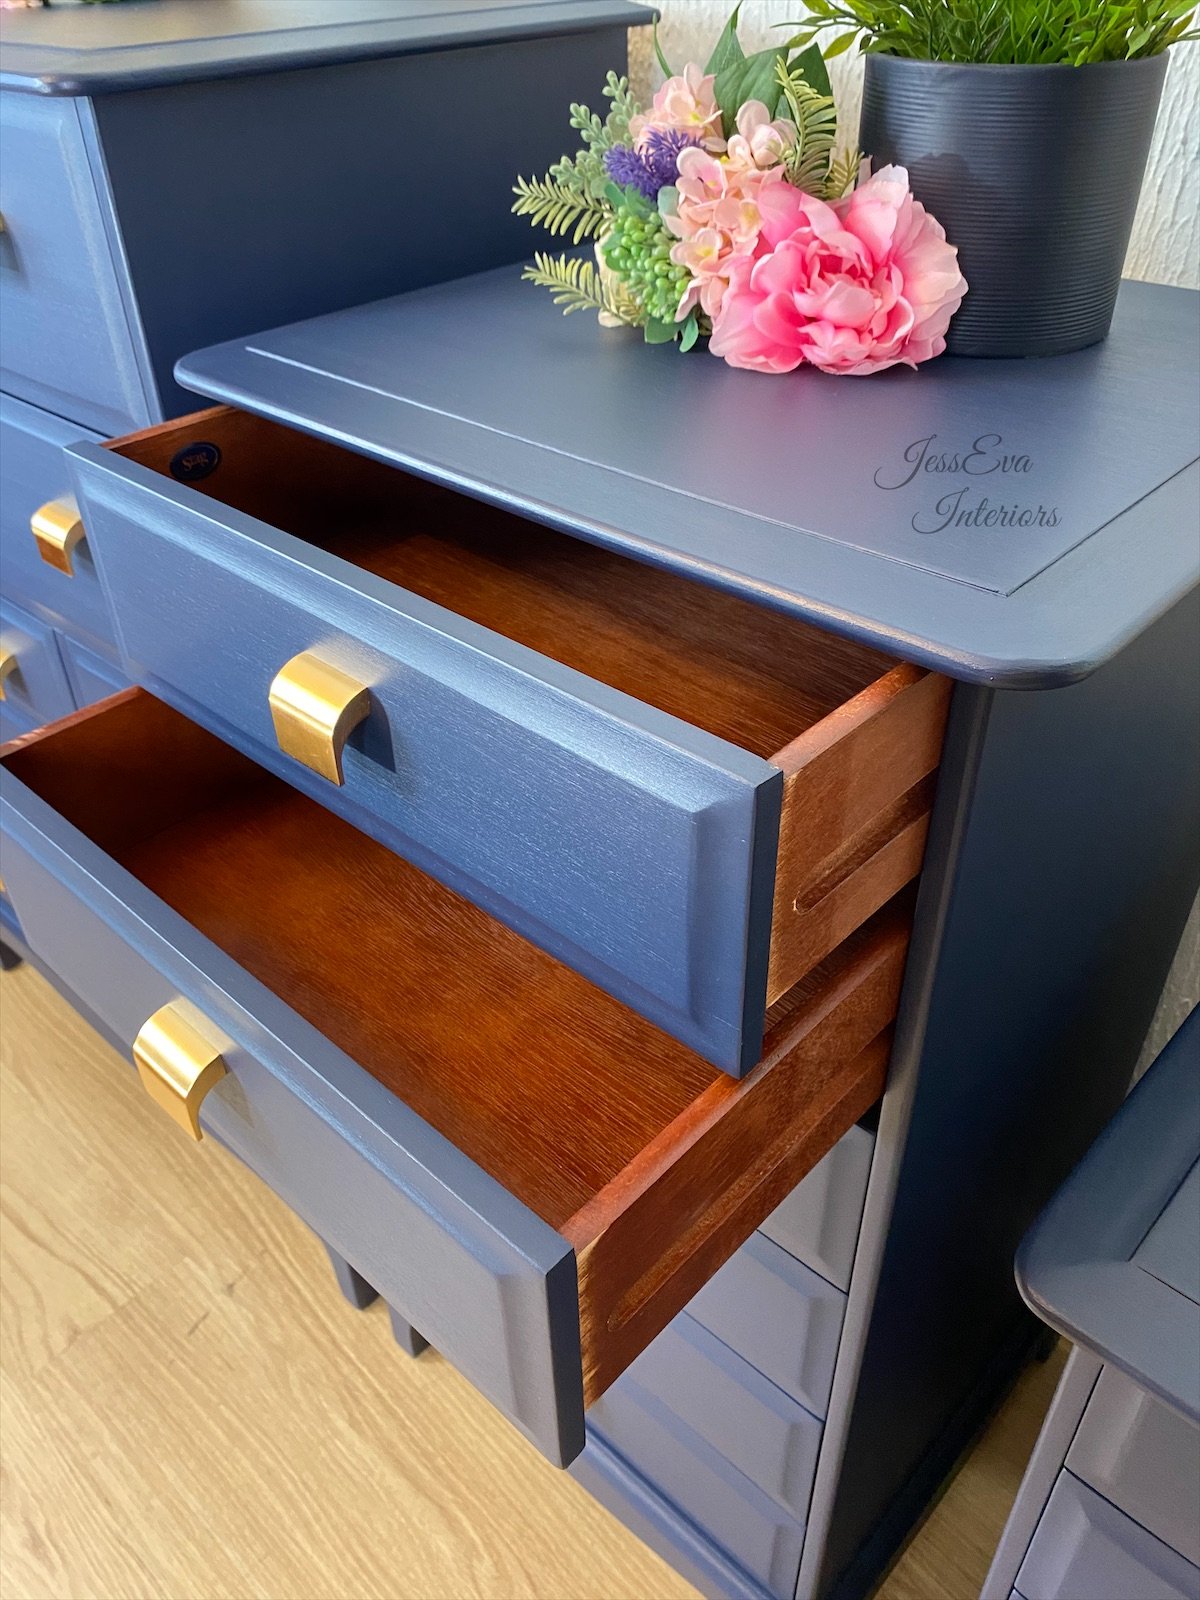 Vintage Stag Minstrel Bedroom Furniture. Tallboy, Chest Of Drawers and Bedside Table in Navy Blue 